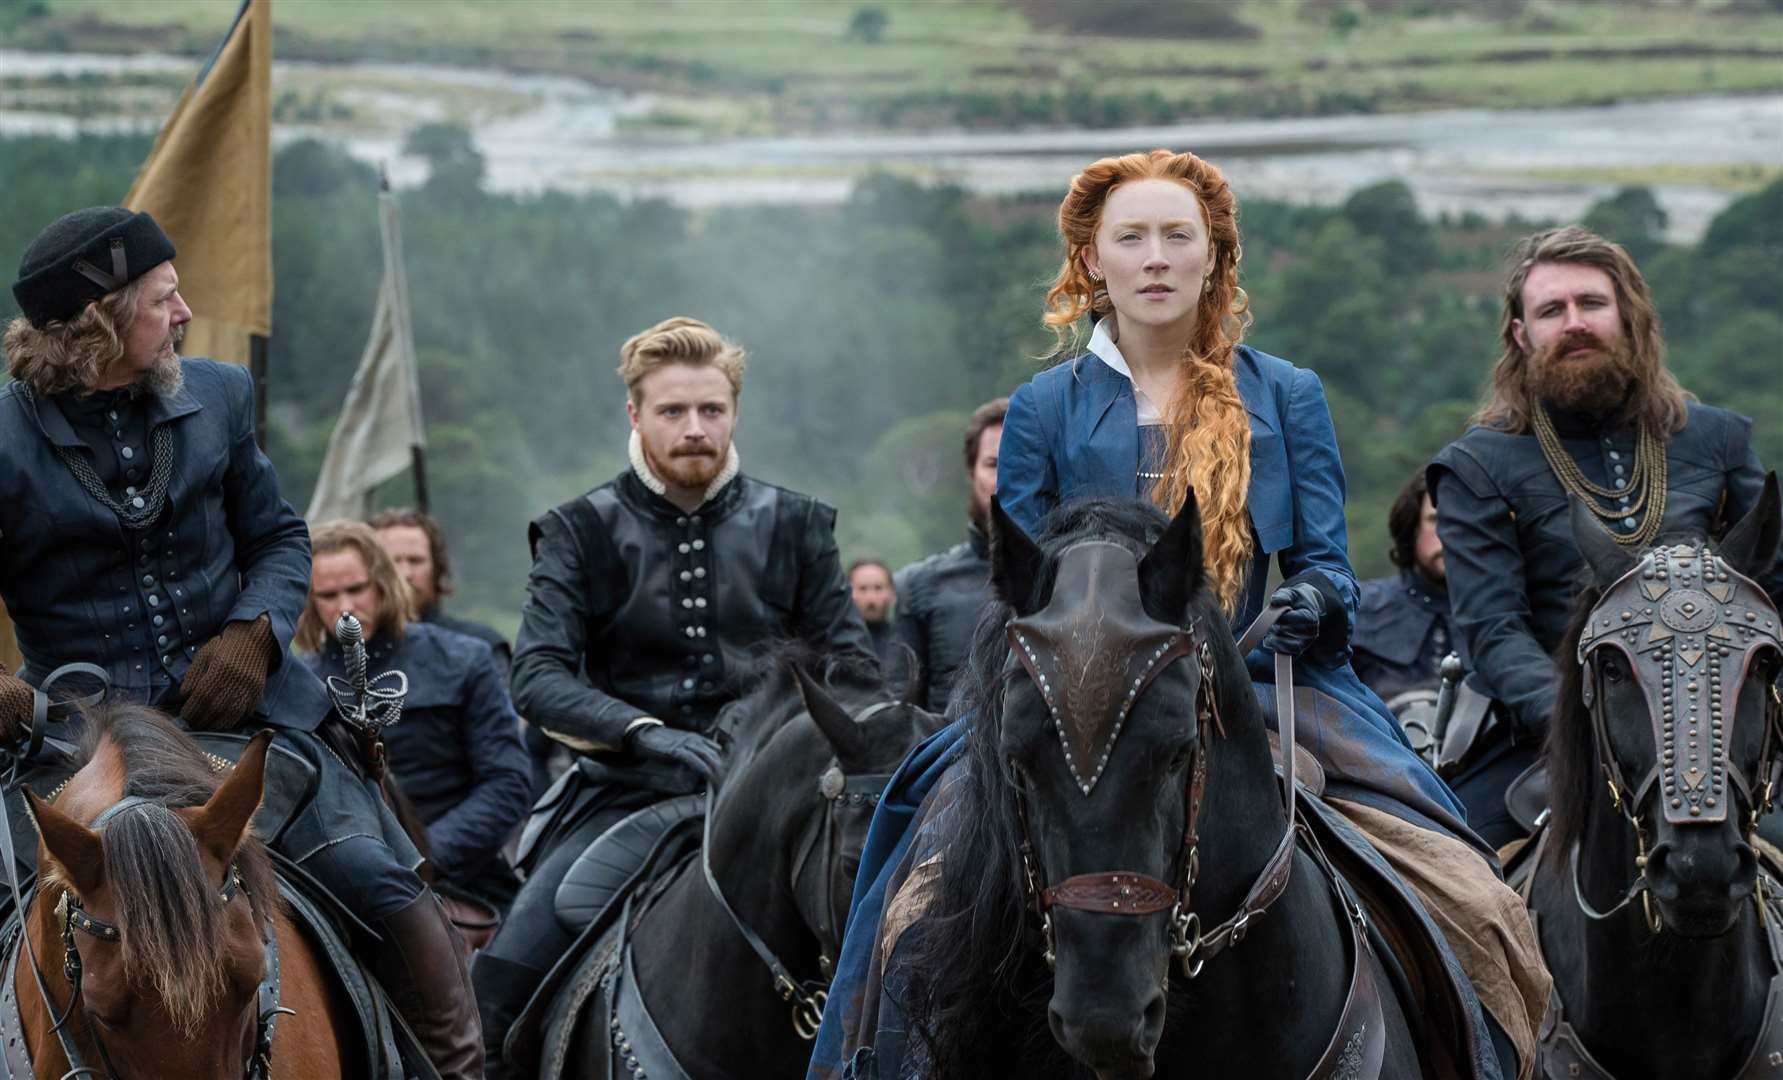 Jack Lowden as Lord Darnley, Saoirse Ronan as Mary Stuart and James McArdle as Earl of Moray in Mary Queen of Scots, filmed in part at Penshurst Place Picture: Liam Daniel/Focus Features